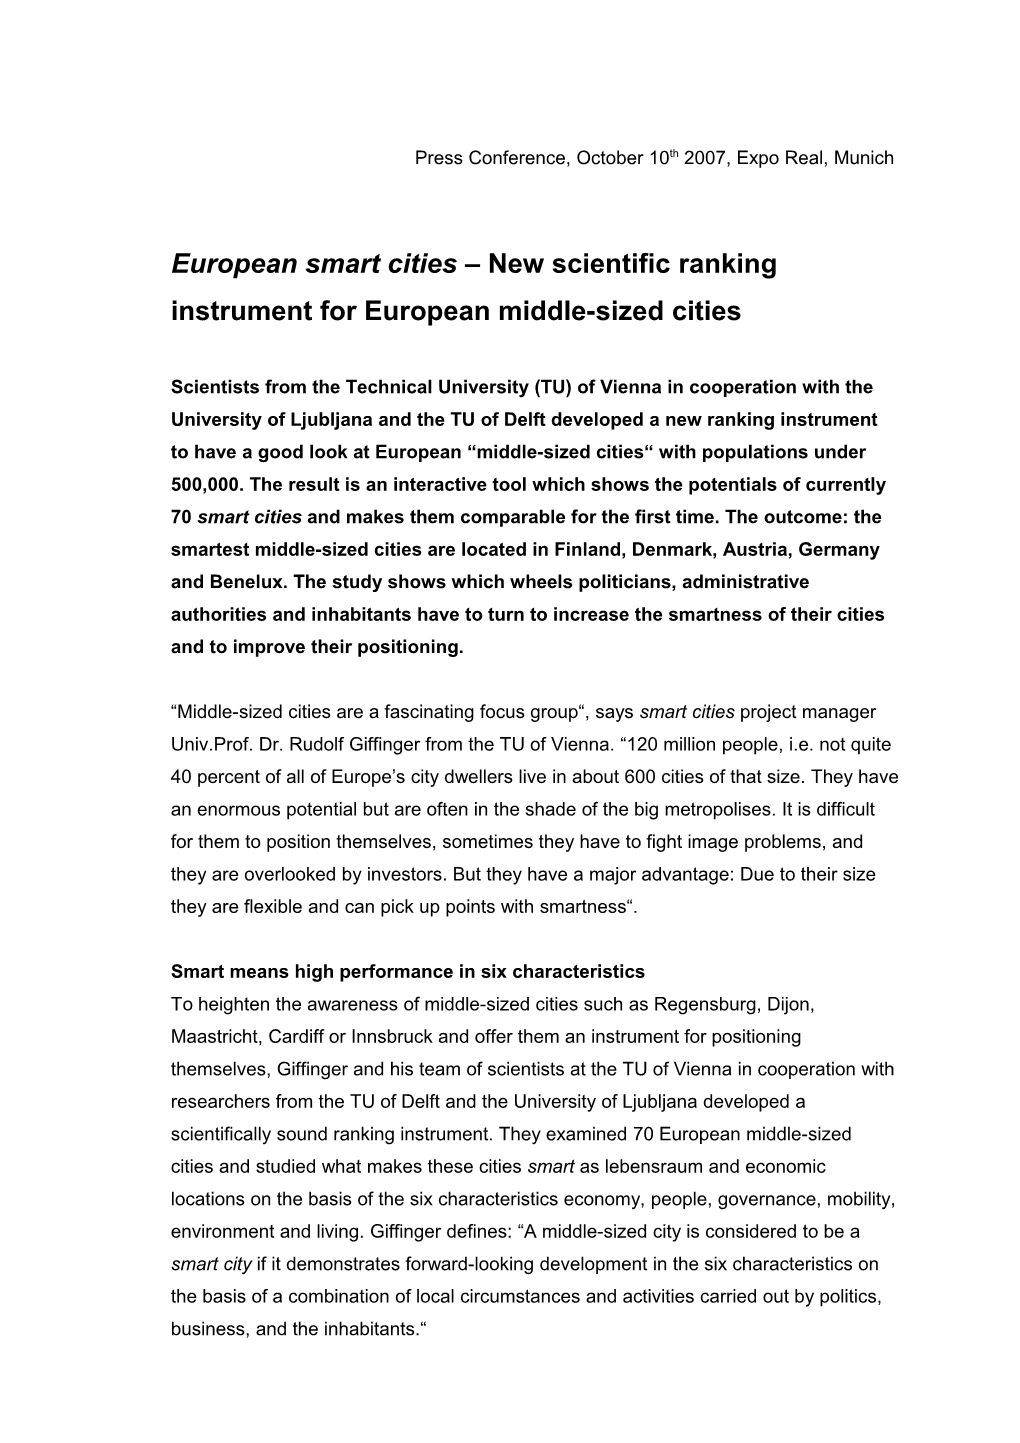 European Smart Cities New Scientific Ranking Instrument for European Middle-Sized Cities